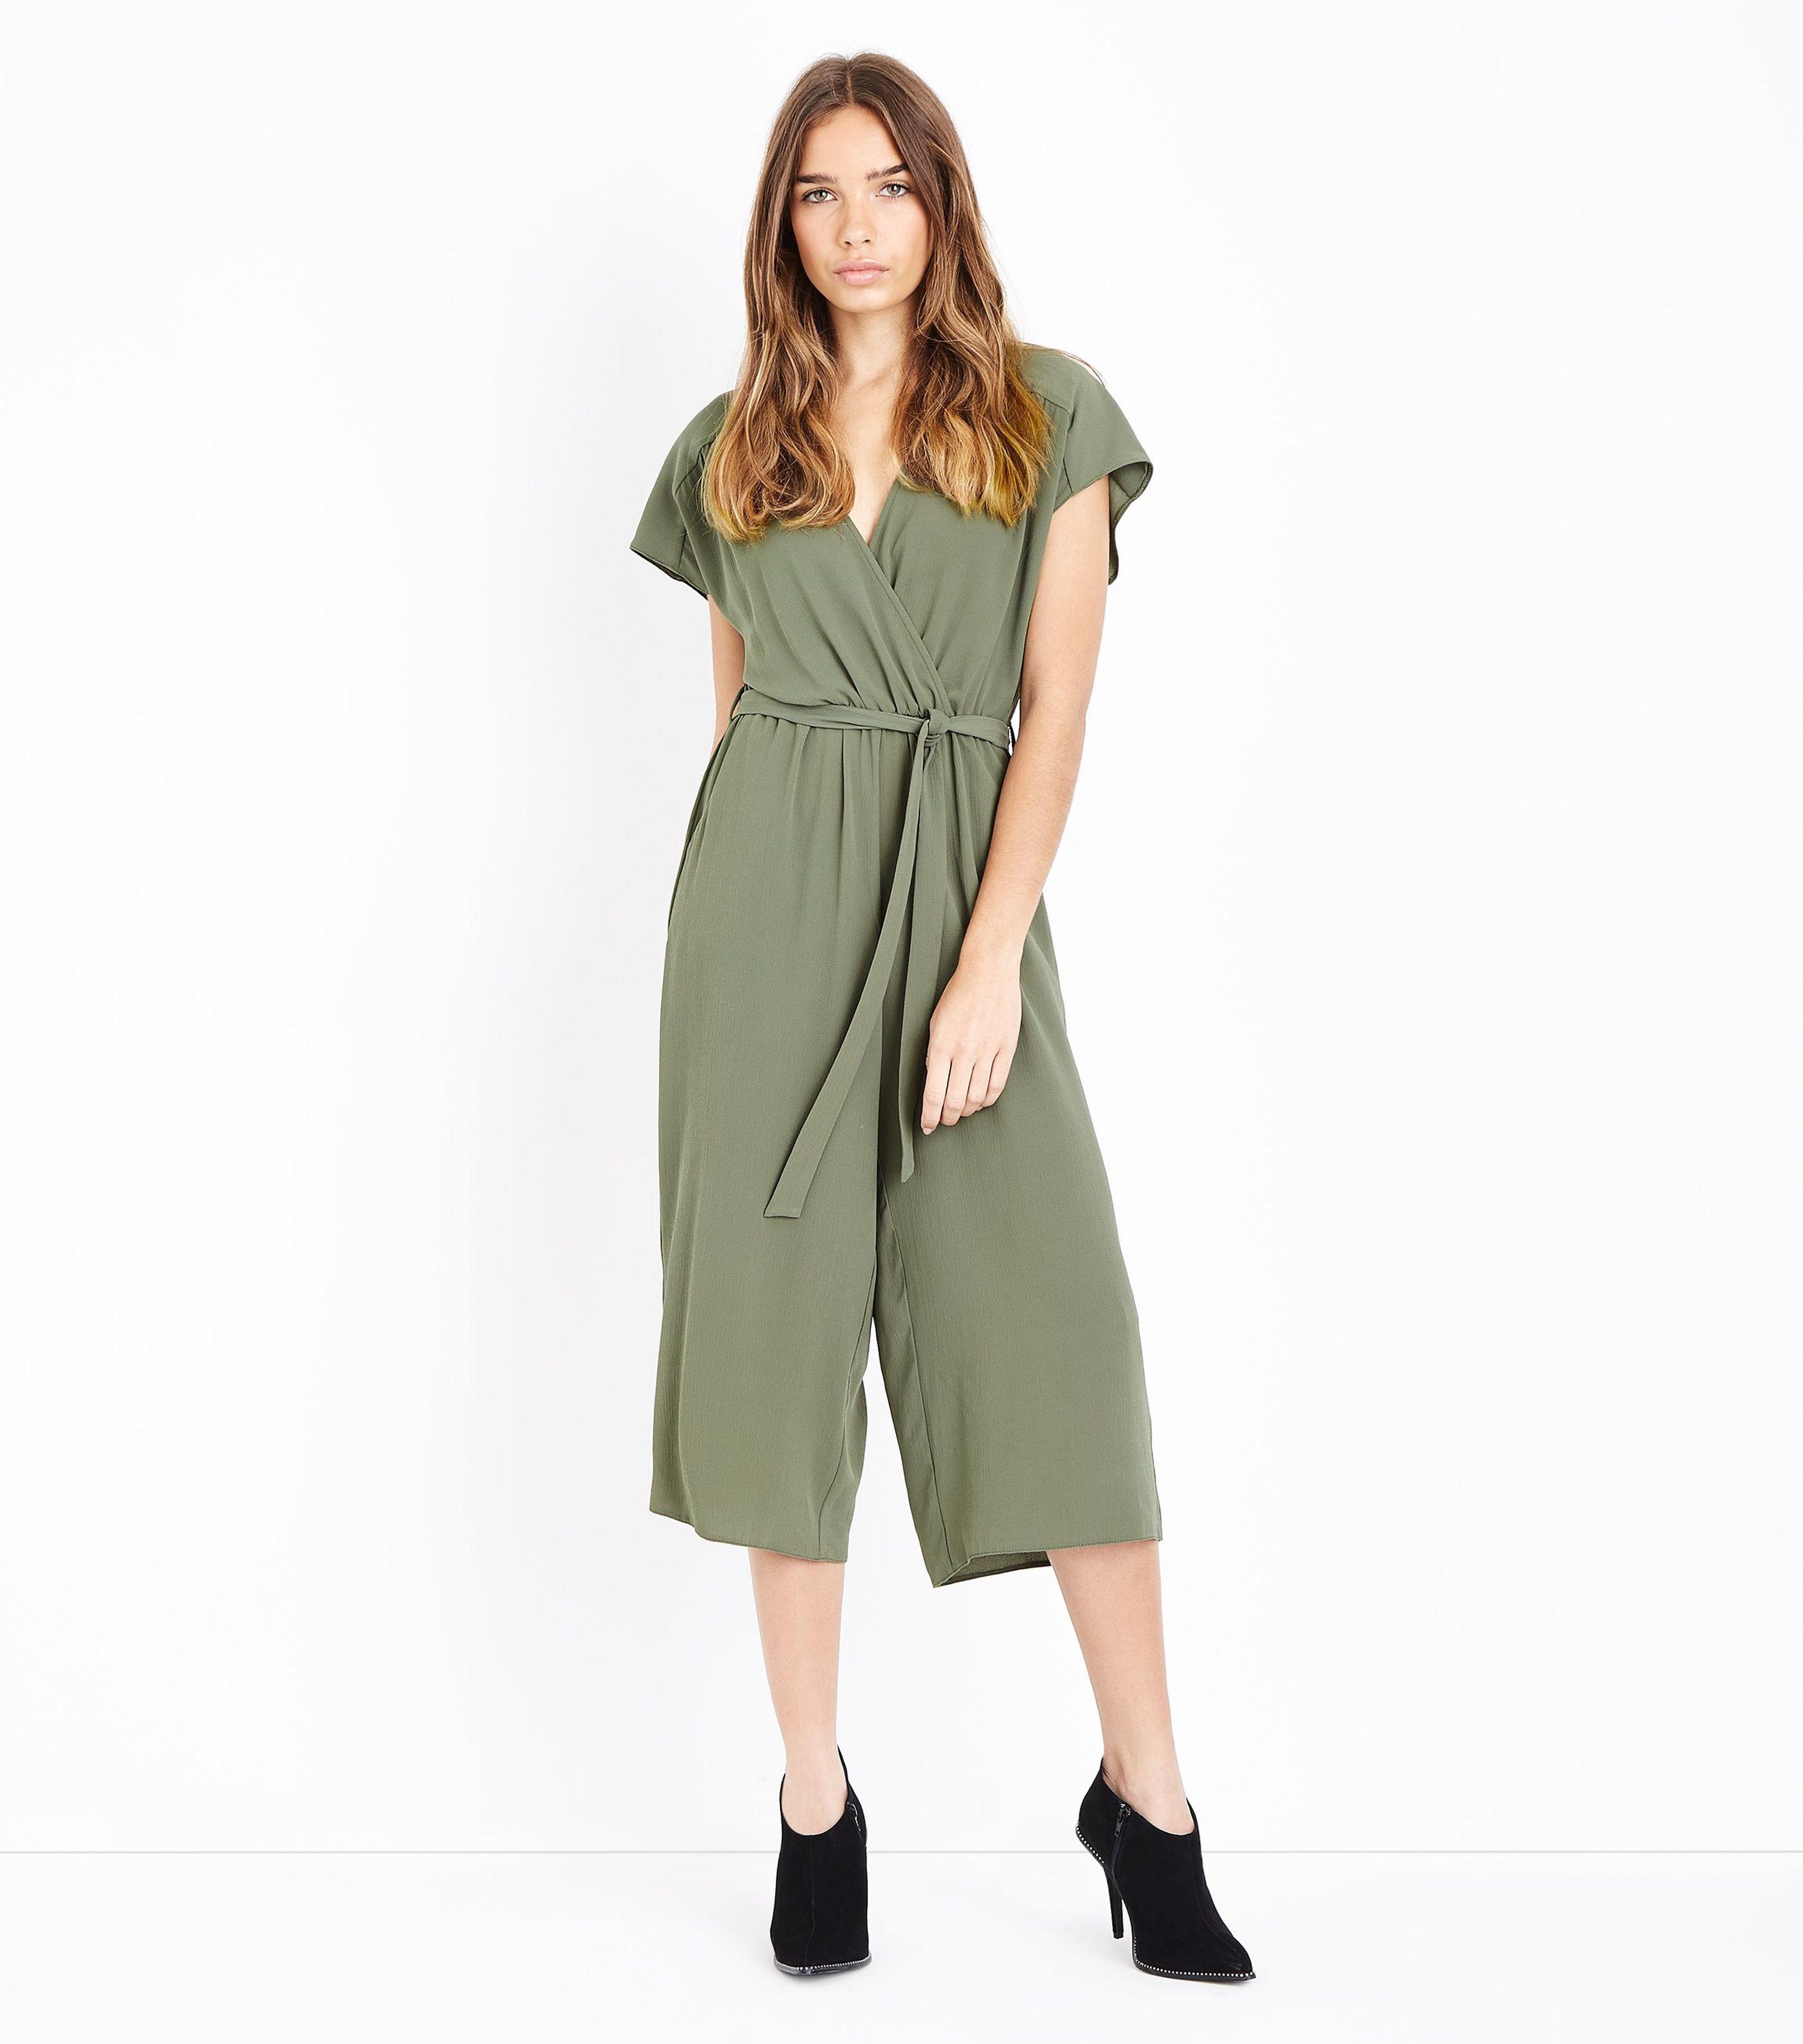 Green Jumpsuit New Look Online Hotsell ...